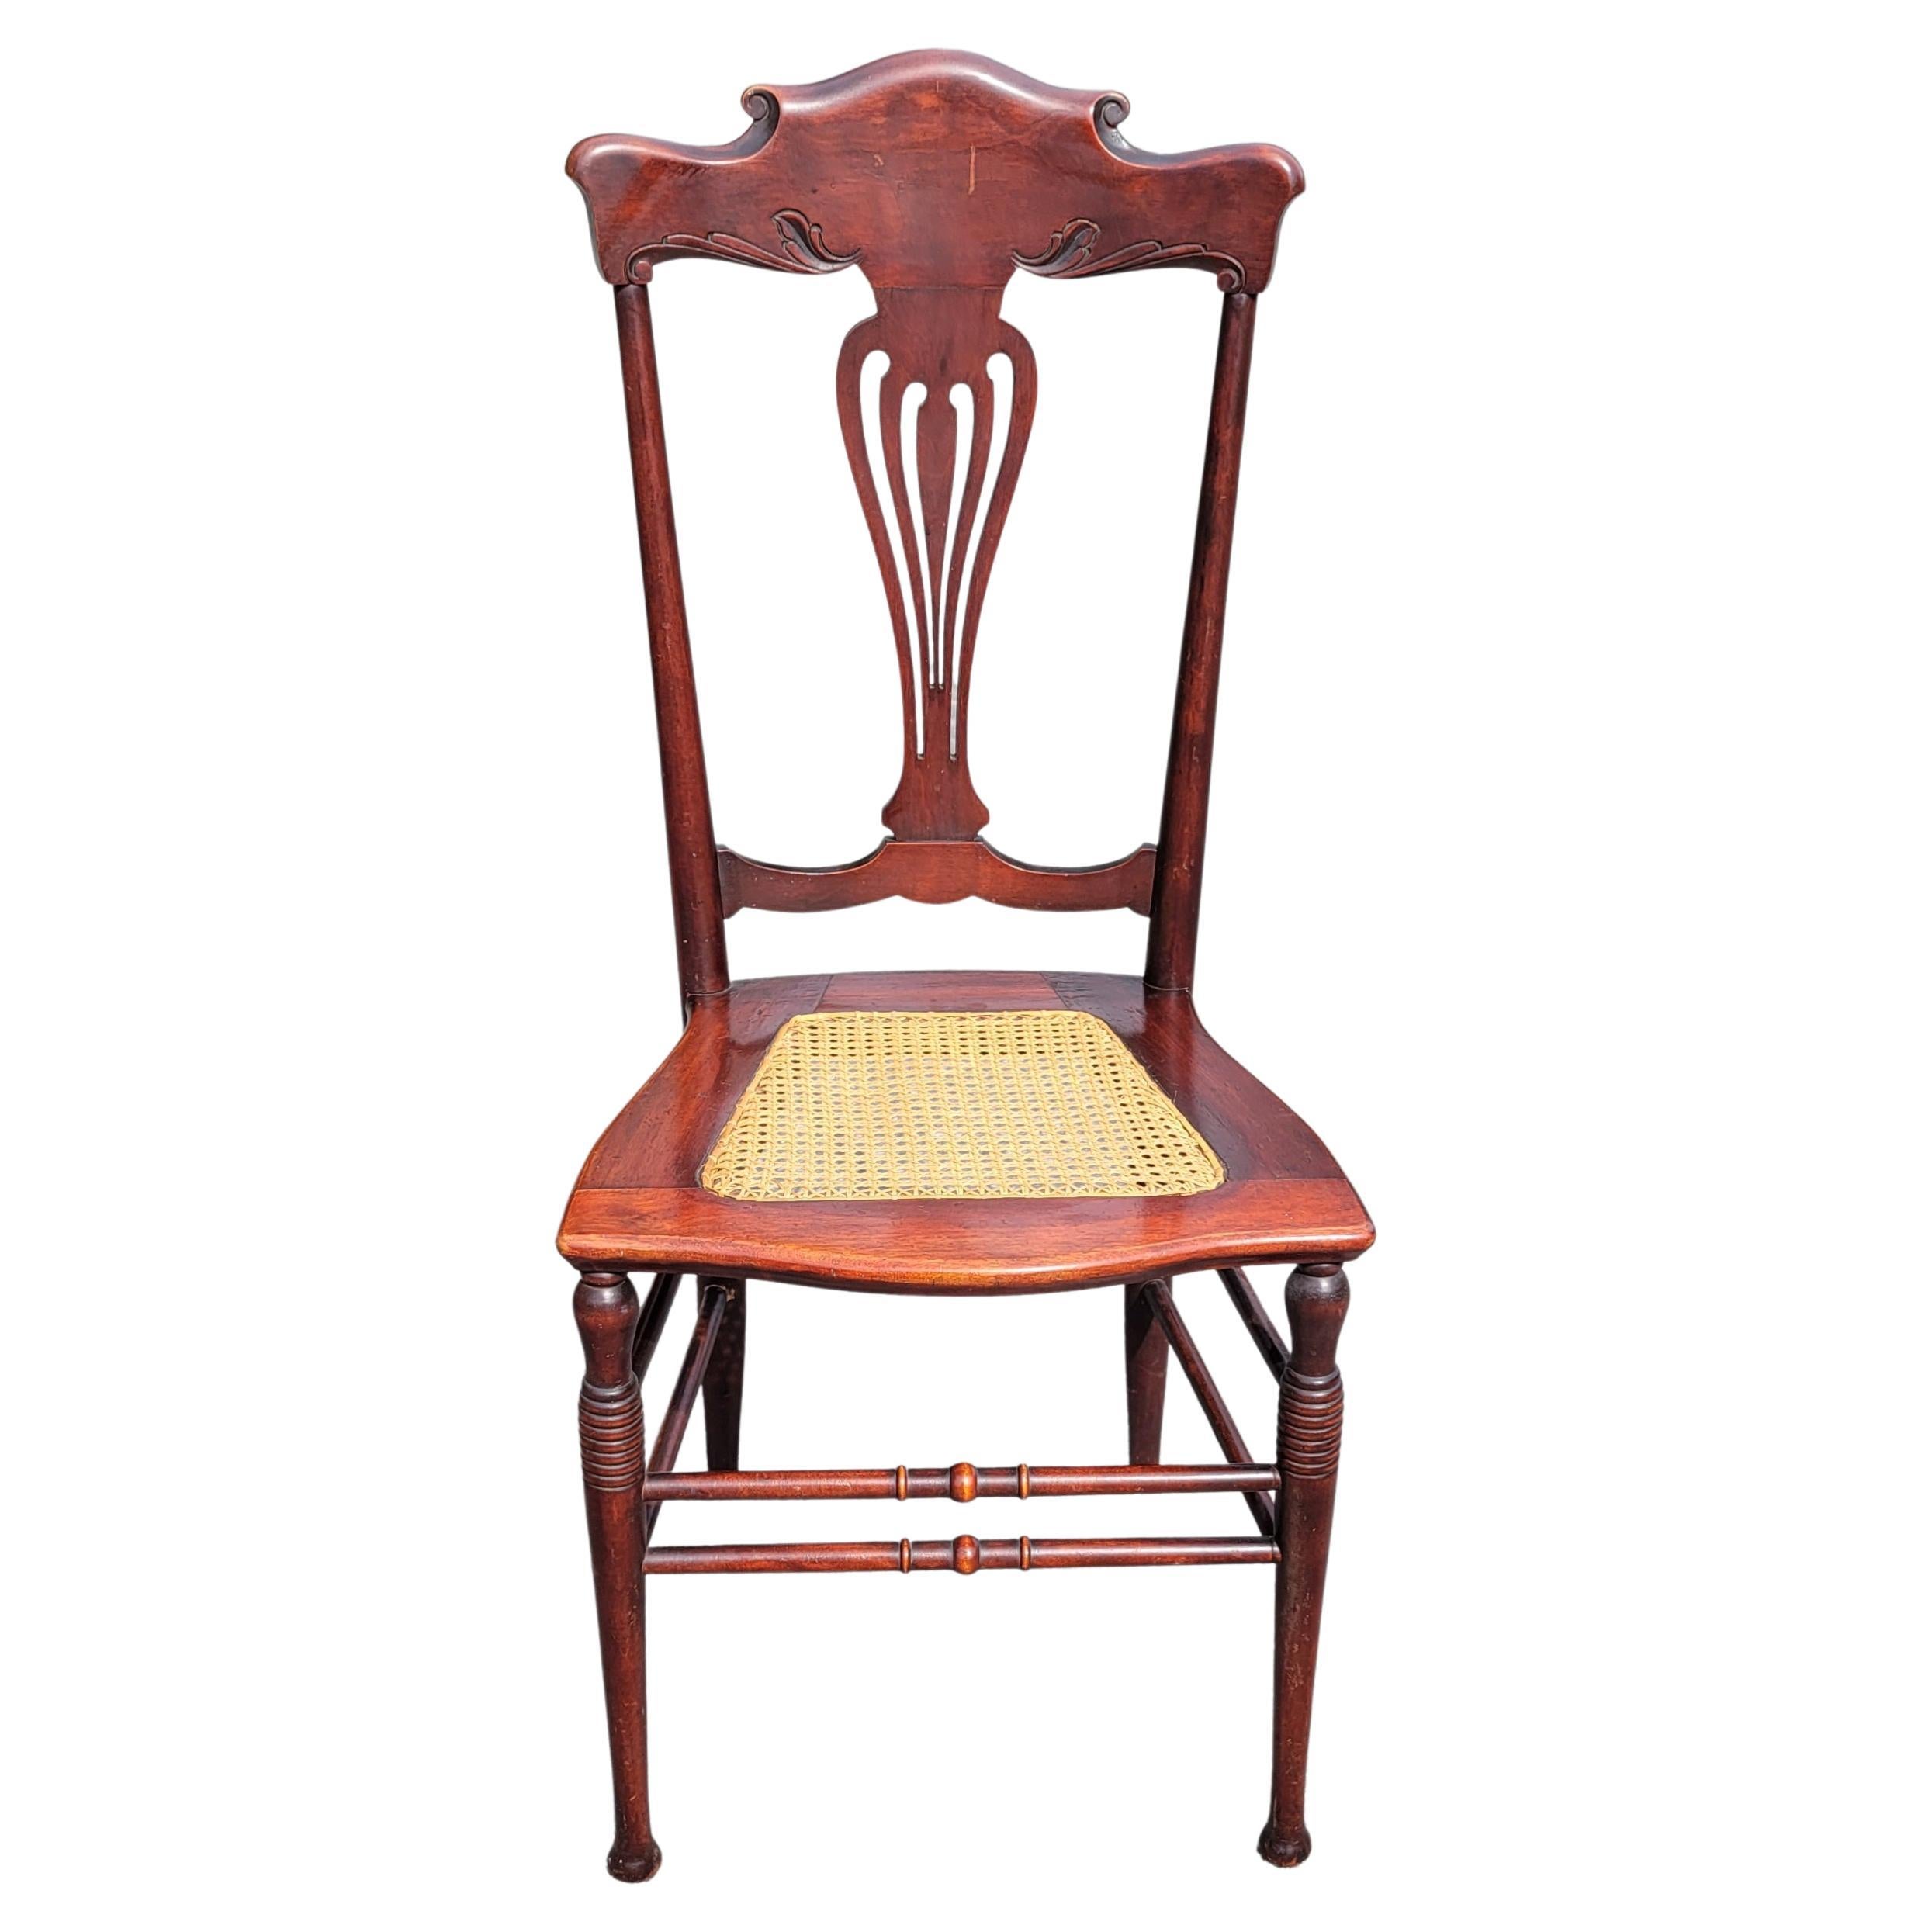 Refinished Early American Empire Mahogany and Cane Seat Chair For Sale